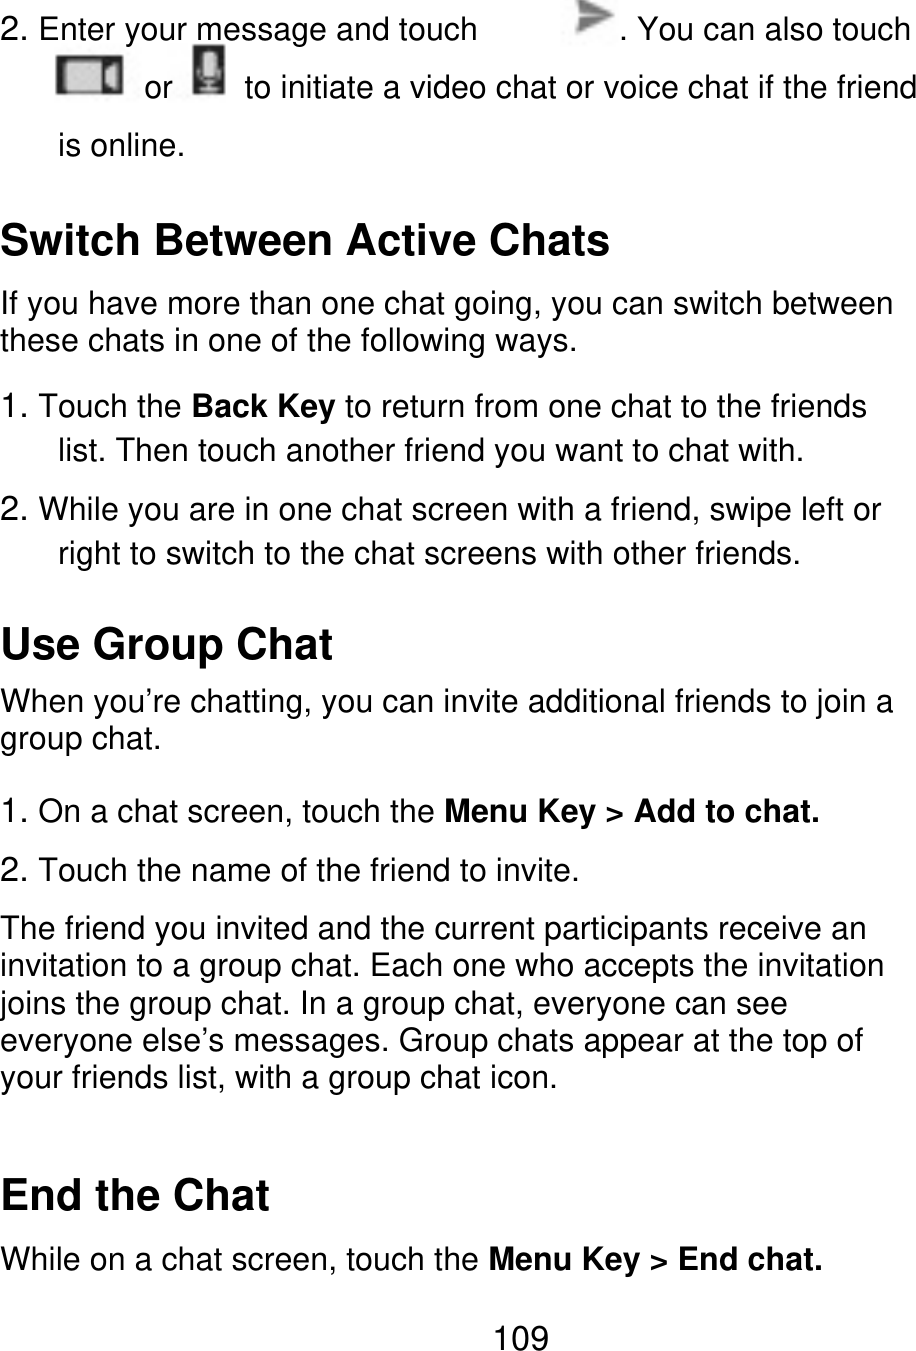 2. Enter your message and touch or is online. . You can also touch to initiate a video chat or voice chat if the friend Switch Between Active Chats If you have more than one chat going, you can switch between these chats in one of the following ways. 1. Touch the Back Key to return from one chat to the friends list. Then touch another friend you want to chat with. 2. While you are in one chat screen with a friend, swipe left or right to switch to the chat screens with other friends. Use Group Chat When you’re chatting, you can invite additional friends to join a group chat. 1. On a chat screen, touch the Menu Key &gt; Add to chat. 2. Touch the name of the friend to invite. The friend you invited and the current participants receive an invitation to a group chat. Each one who accepts the invitation joins the group chat. In a group chat, everyone can see everyone else’s messages. Group chats appear at the top of your friends list, with a group chat icon. End the Chat While on a chat screen, touch the Menu Key &gt; End chat. 109 